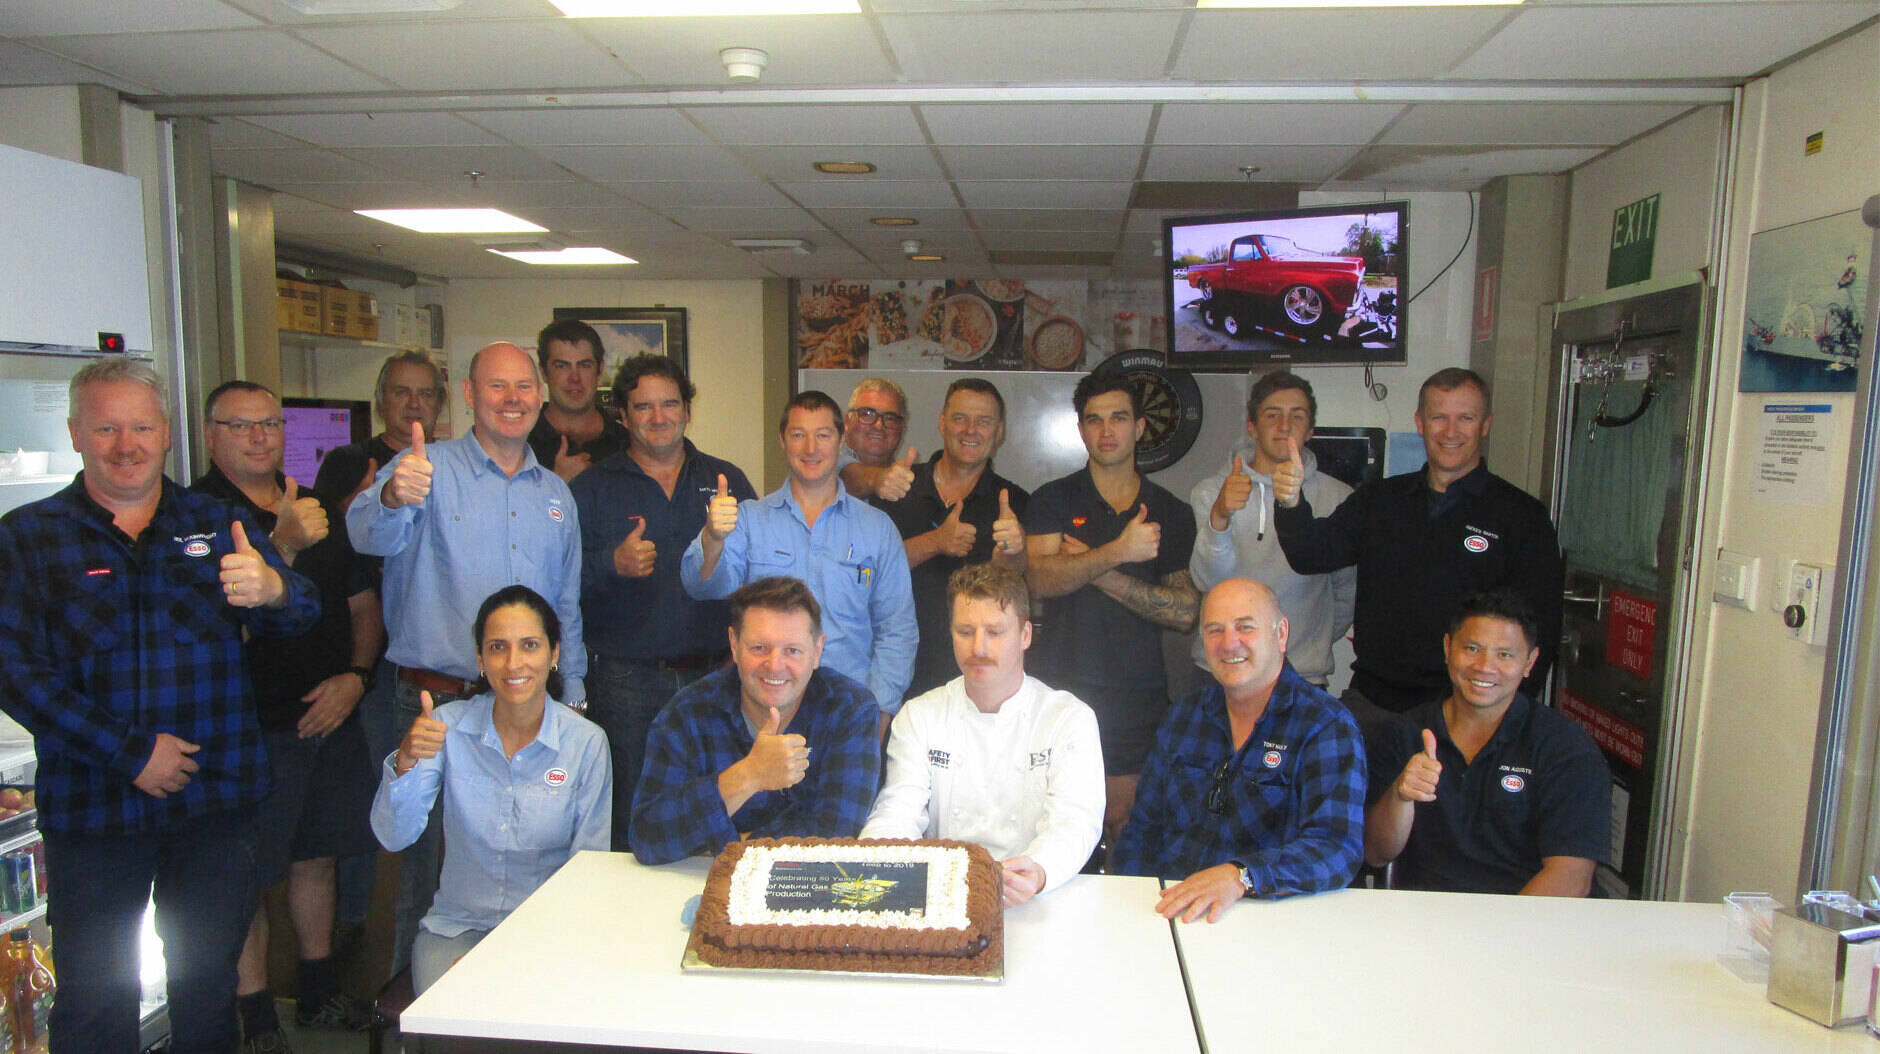 Image Photo— Staff on Barracouta platform celebrate the 50 year anniversary.